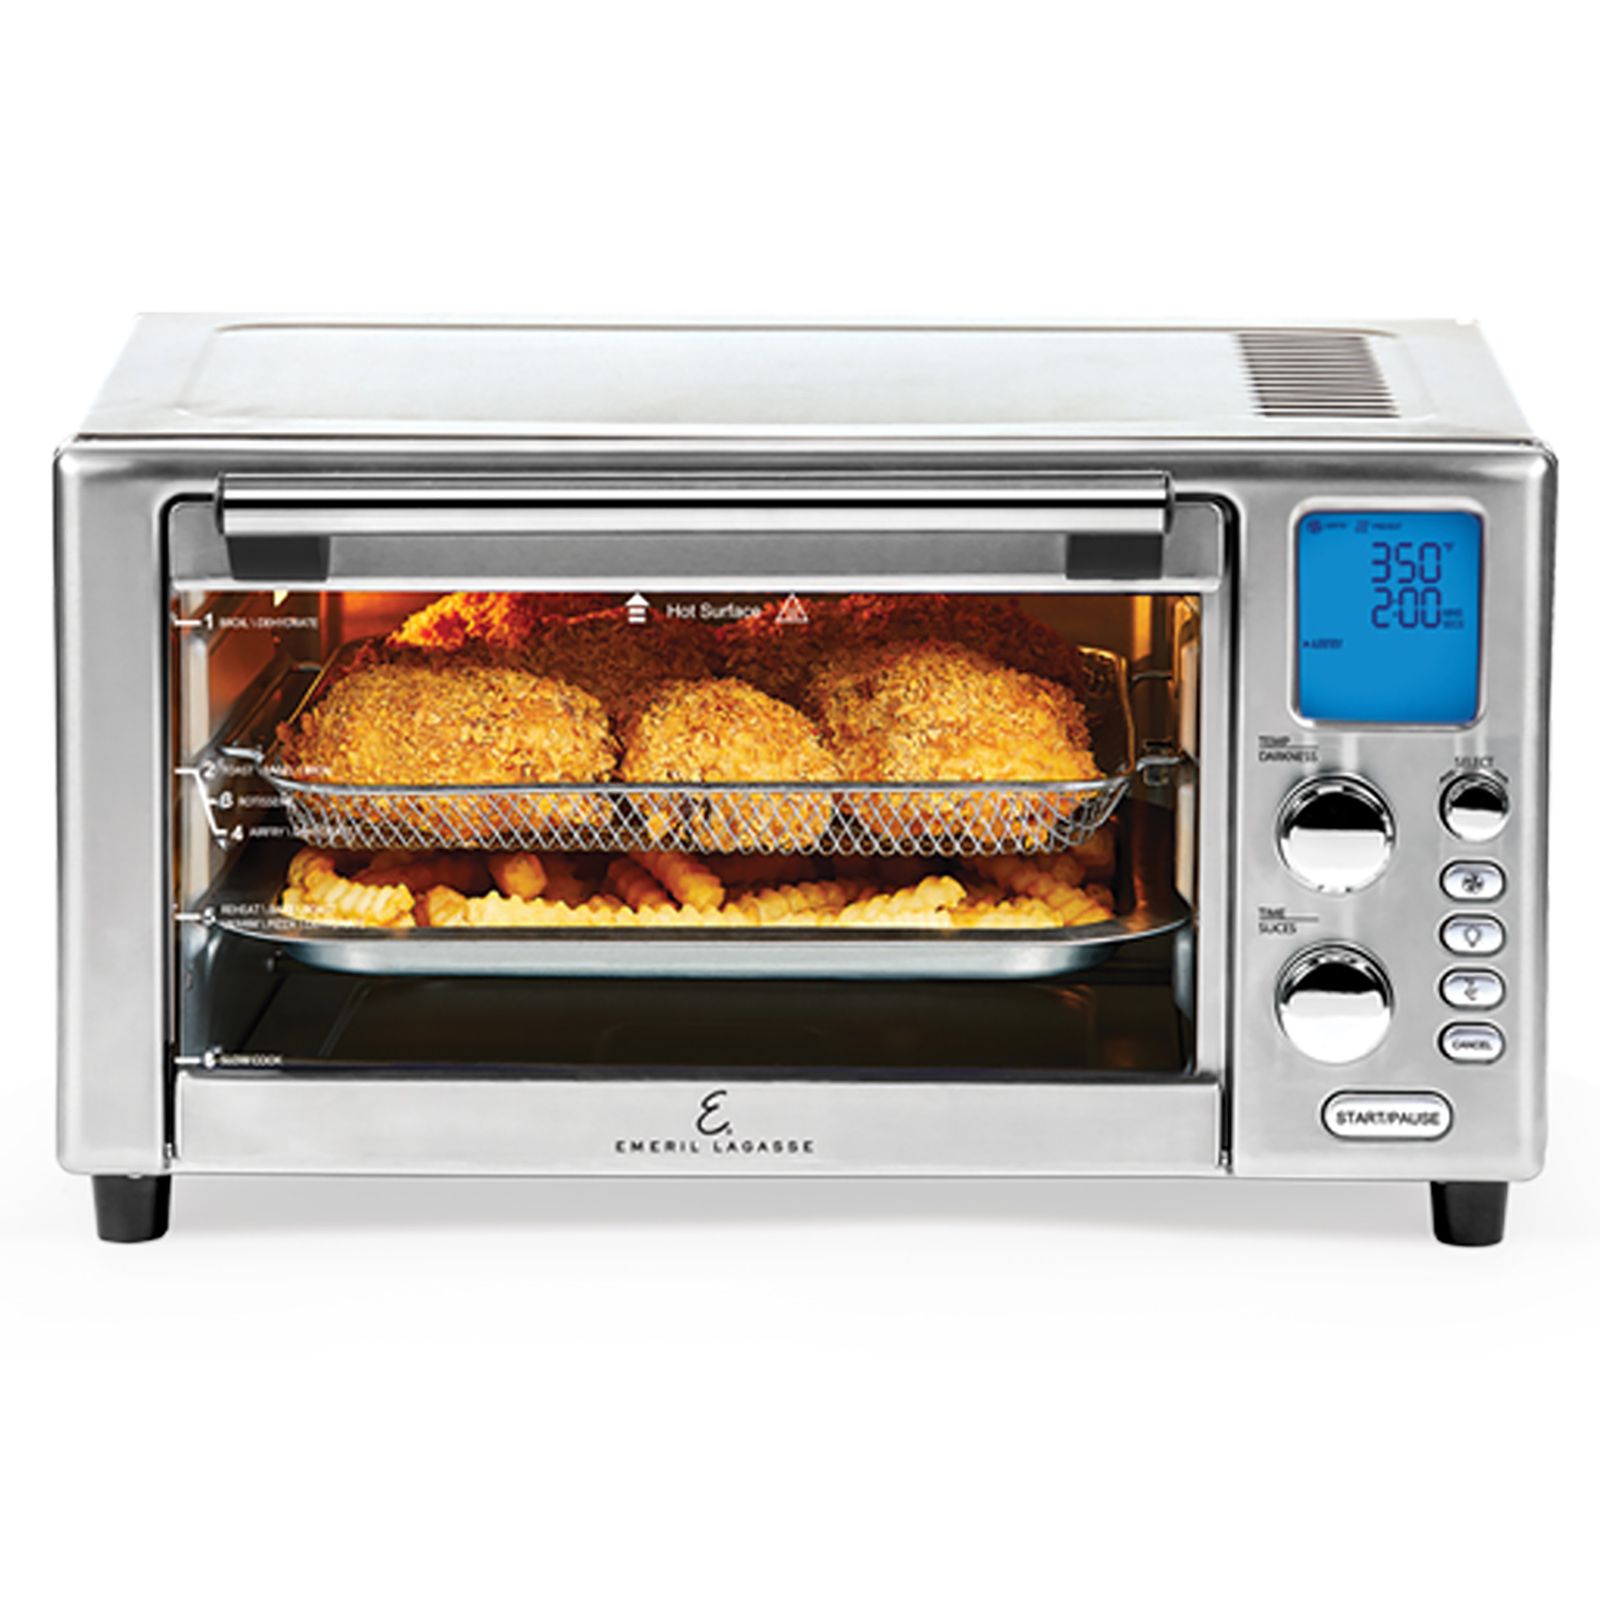 Emeril Lagasse Power AirFryer 360 Plus, Toaster Oven, Stainless Steel, 1500W